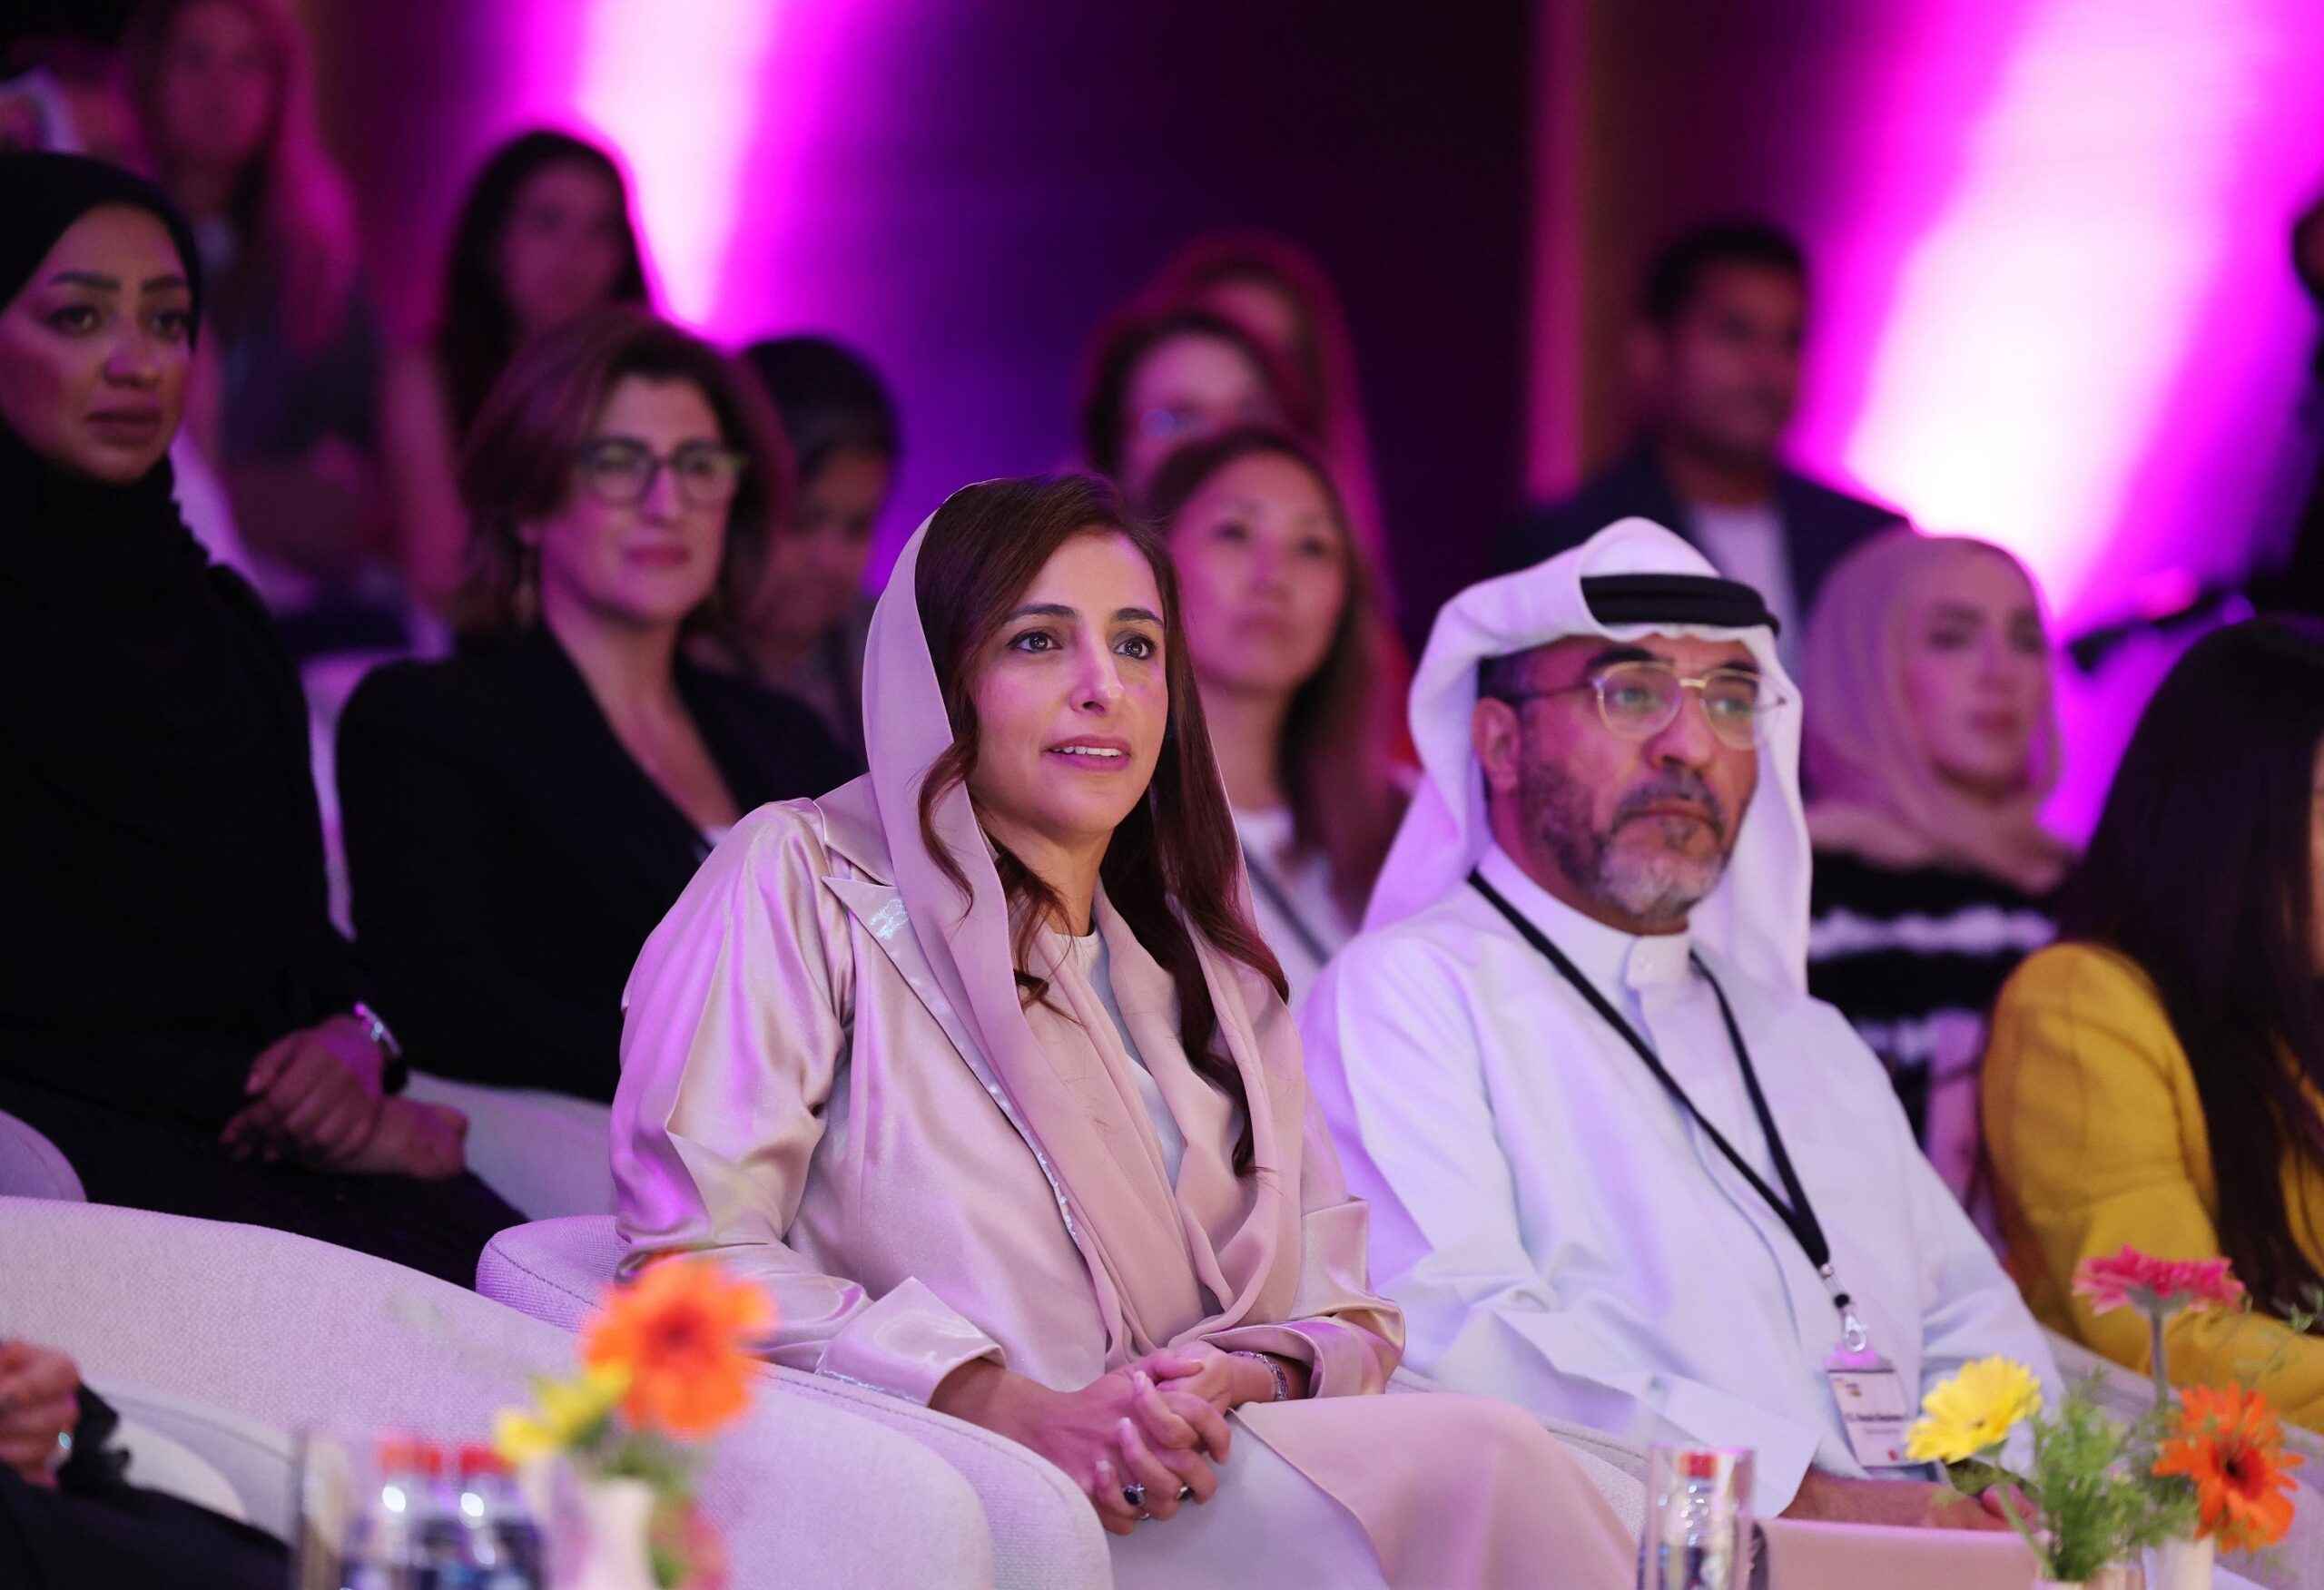 President of American University of Sharjah (AUS) and of Sharjah Research, Technology, and Innovation Park (SRTIP), Sheikha Bodour Al Qasimi. (Source: WAM)